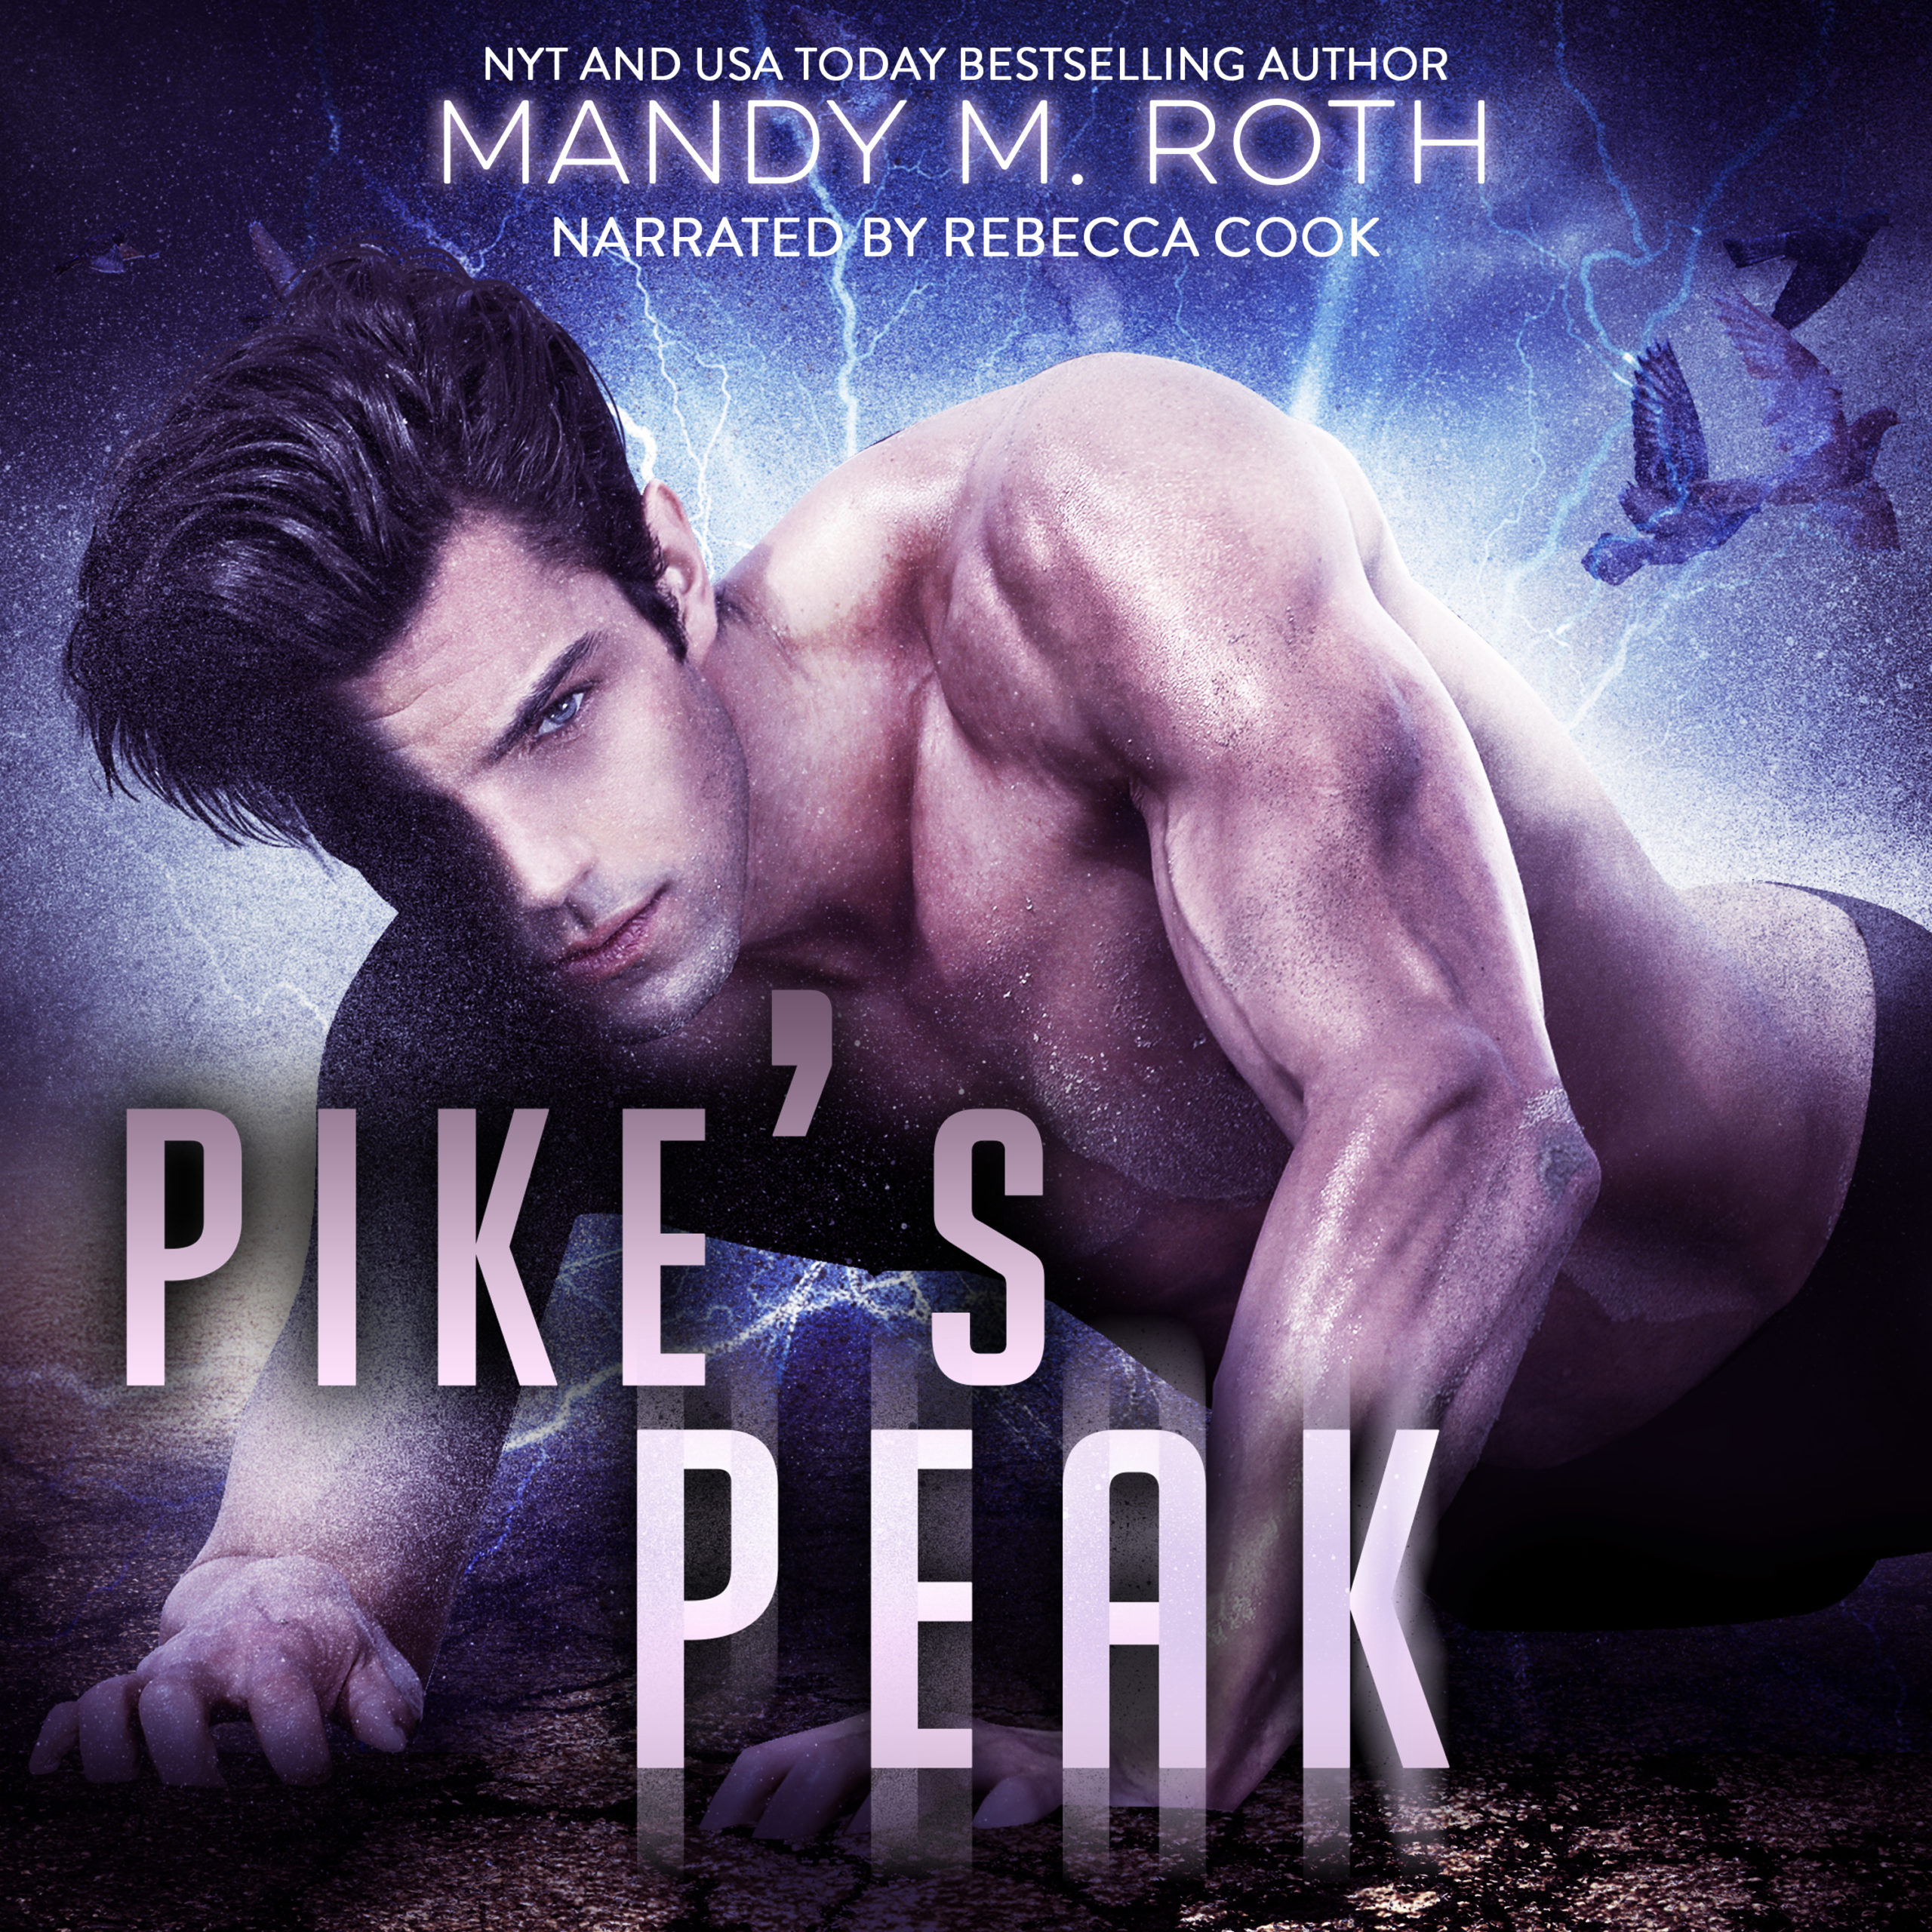 Audiobook proofing for Pike's Peak by Mandy M. Roth